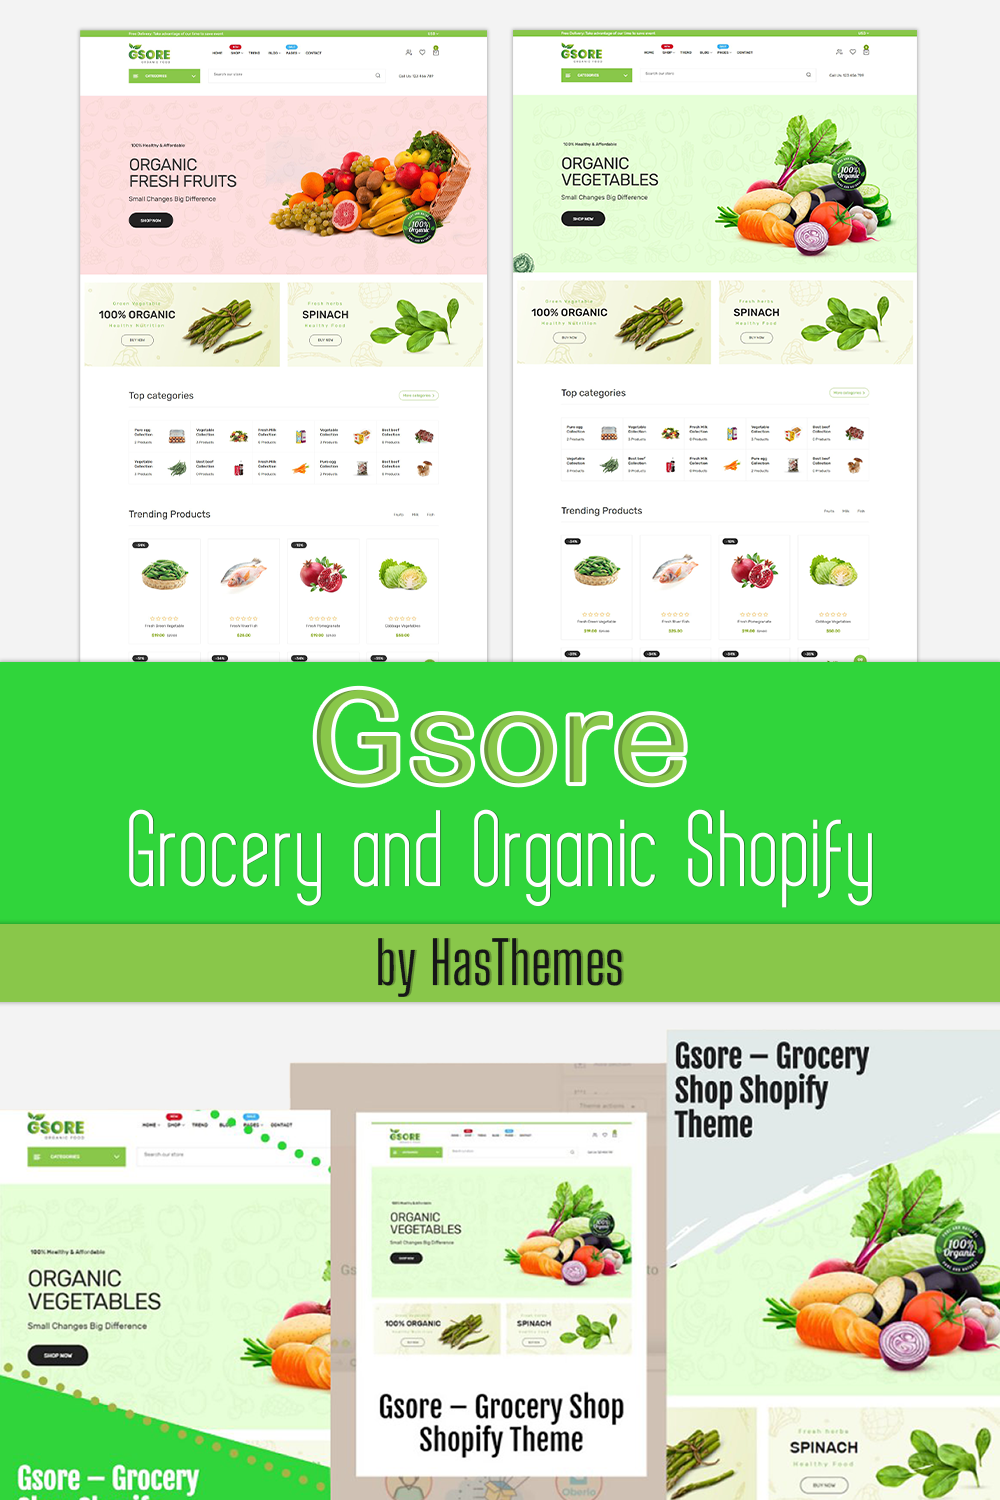 Grocery and organic shopify – gsore images of pinterest.